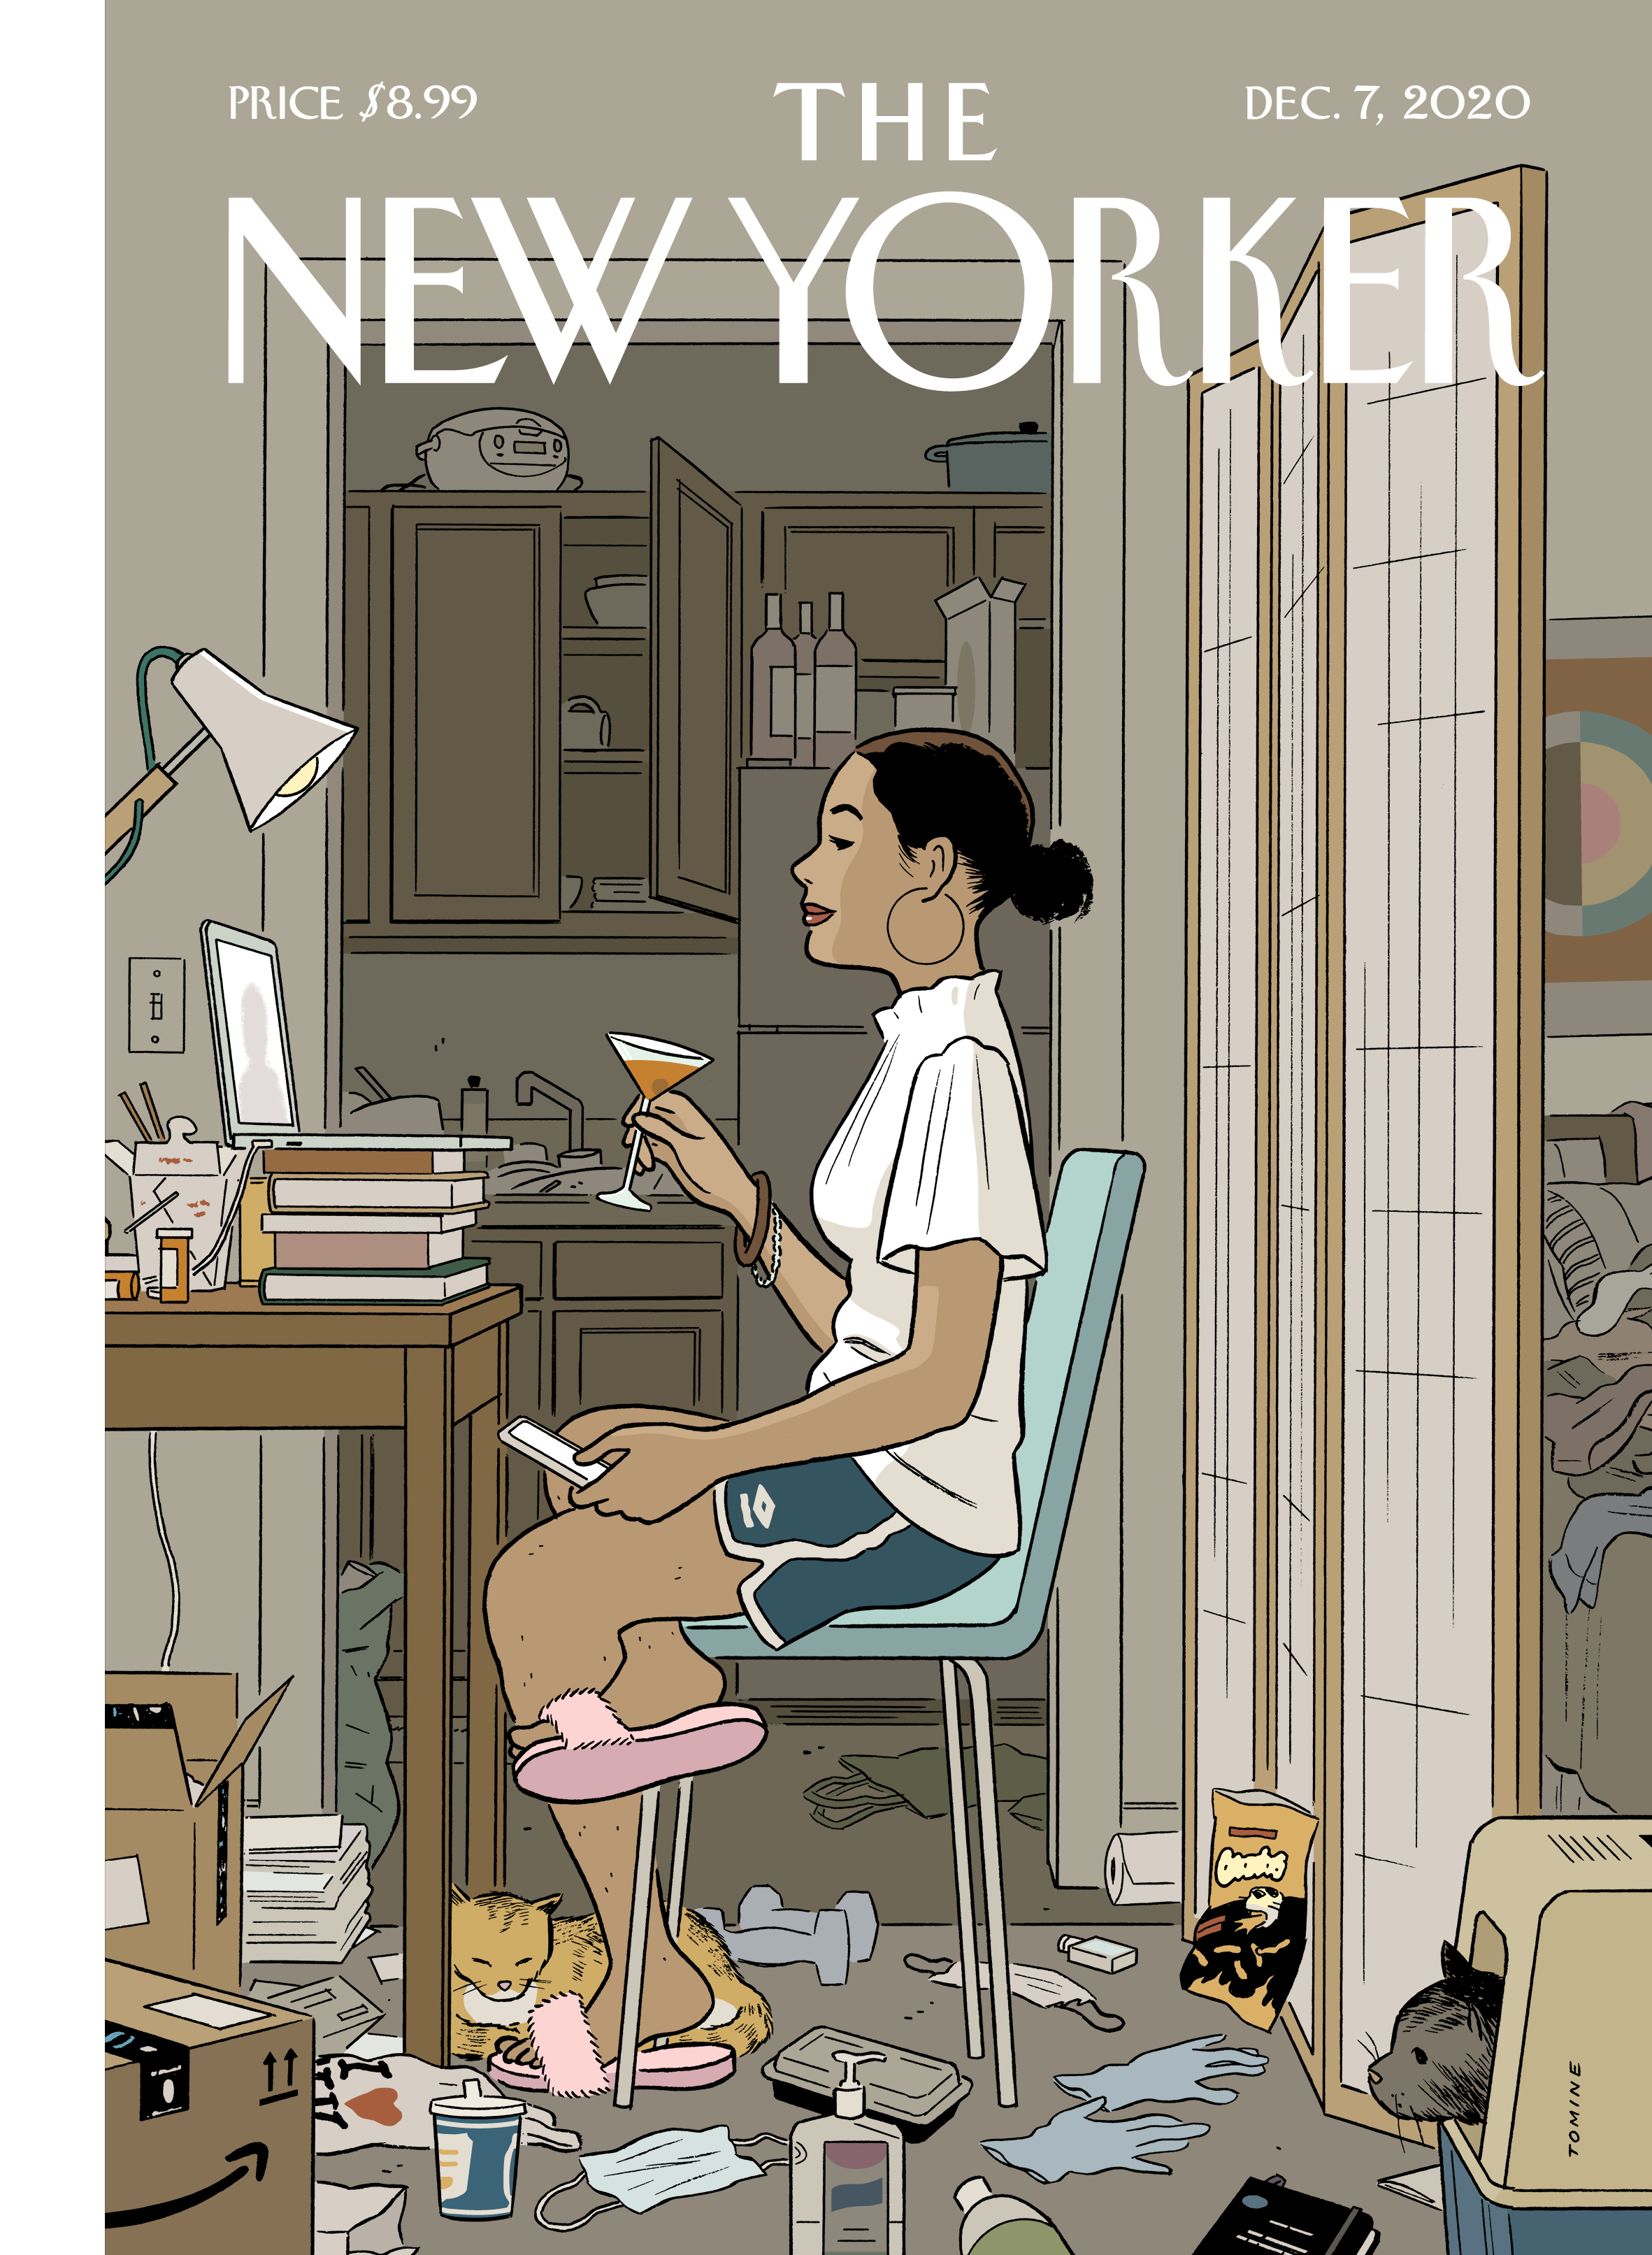 The New Yorker - Best Business and Technology Cover